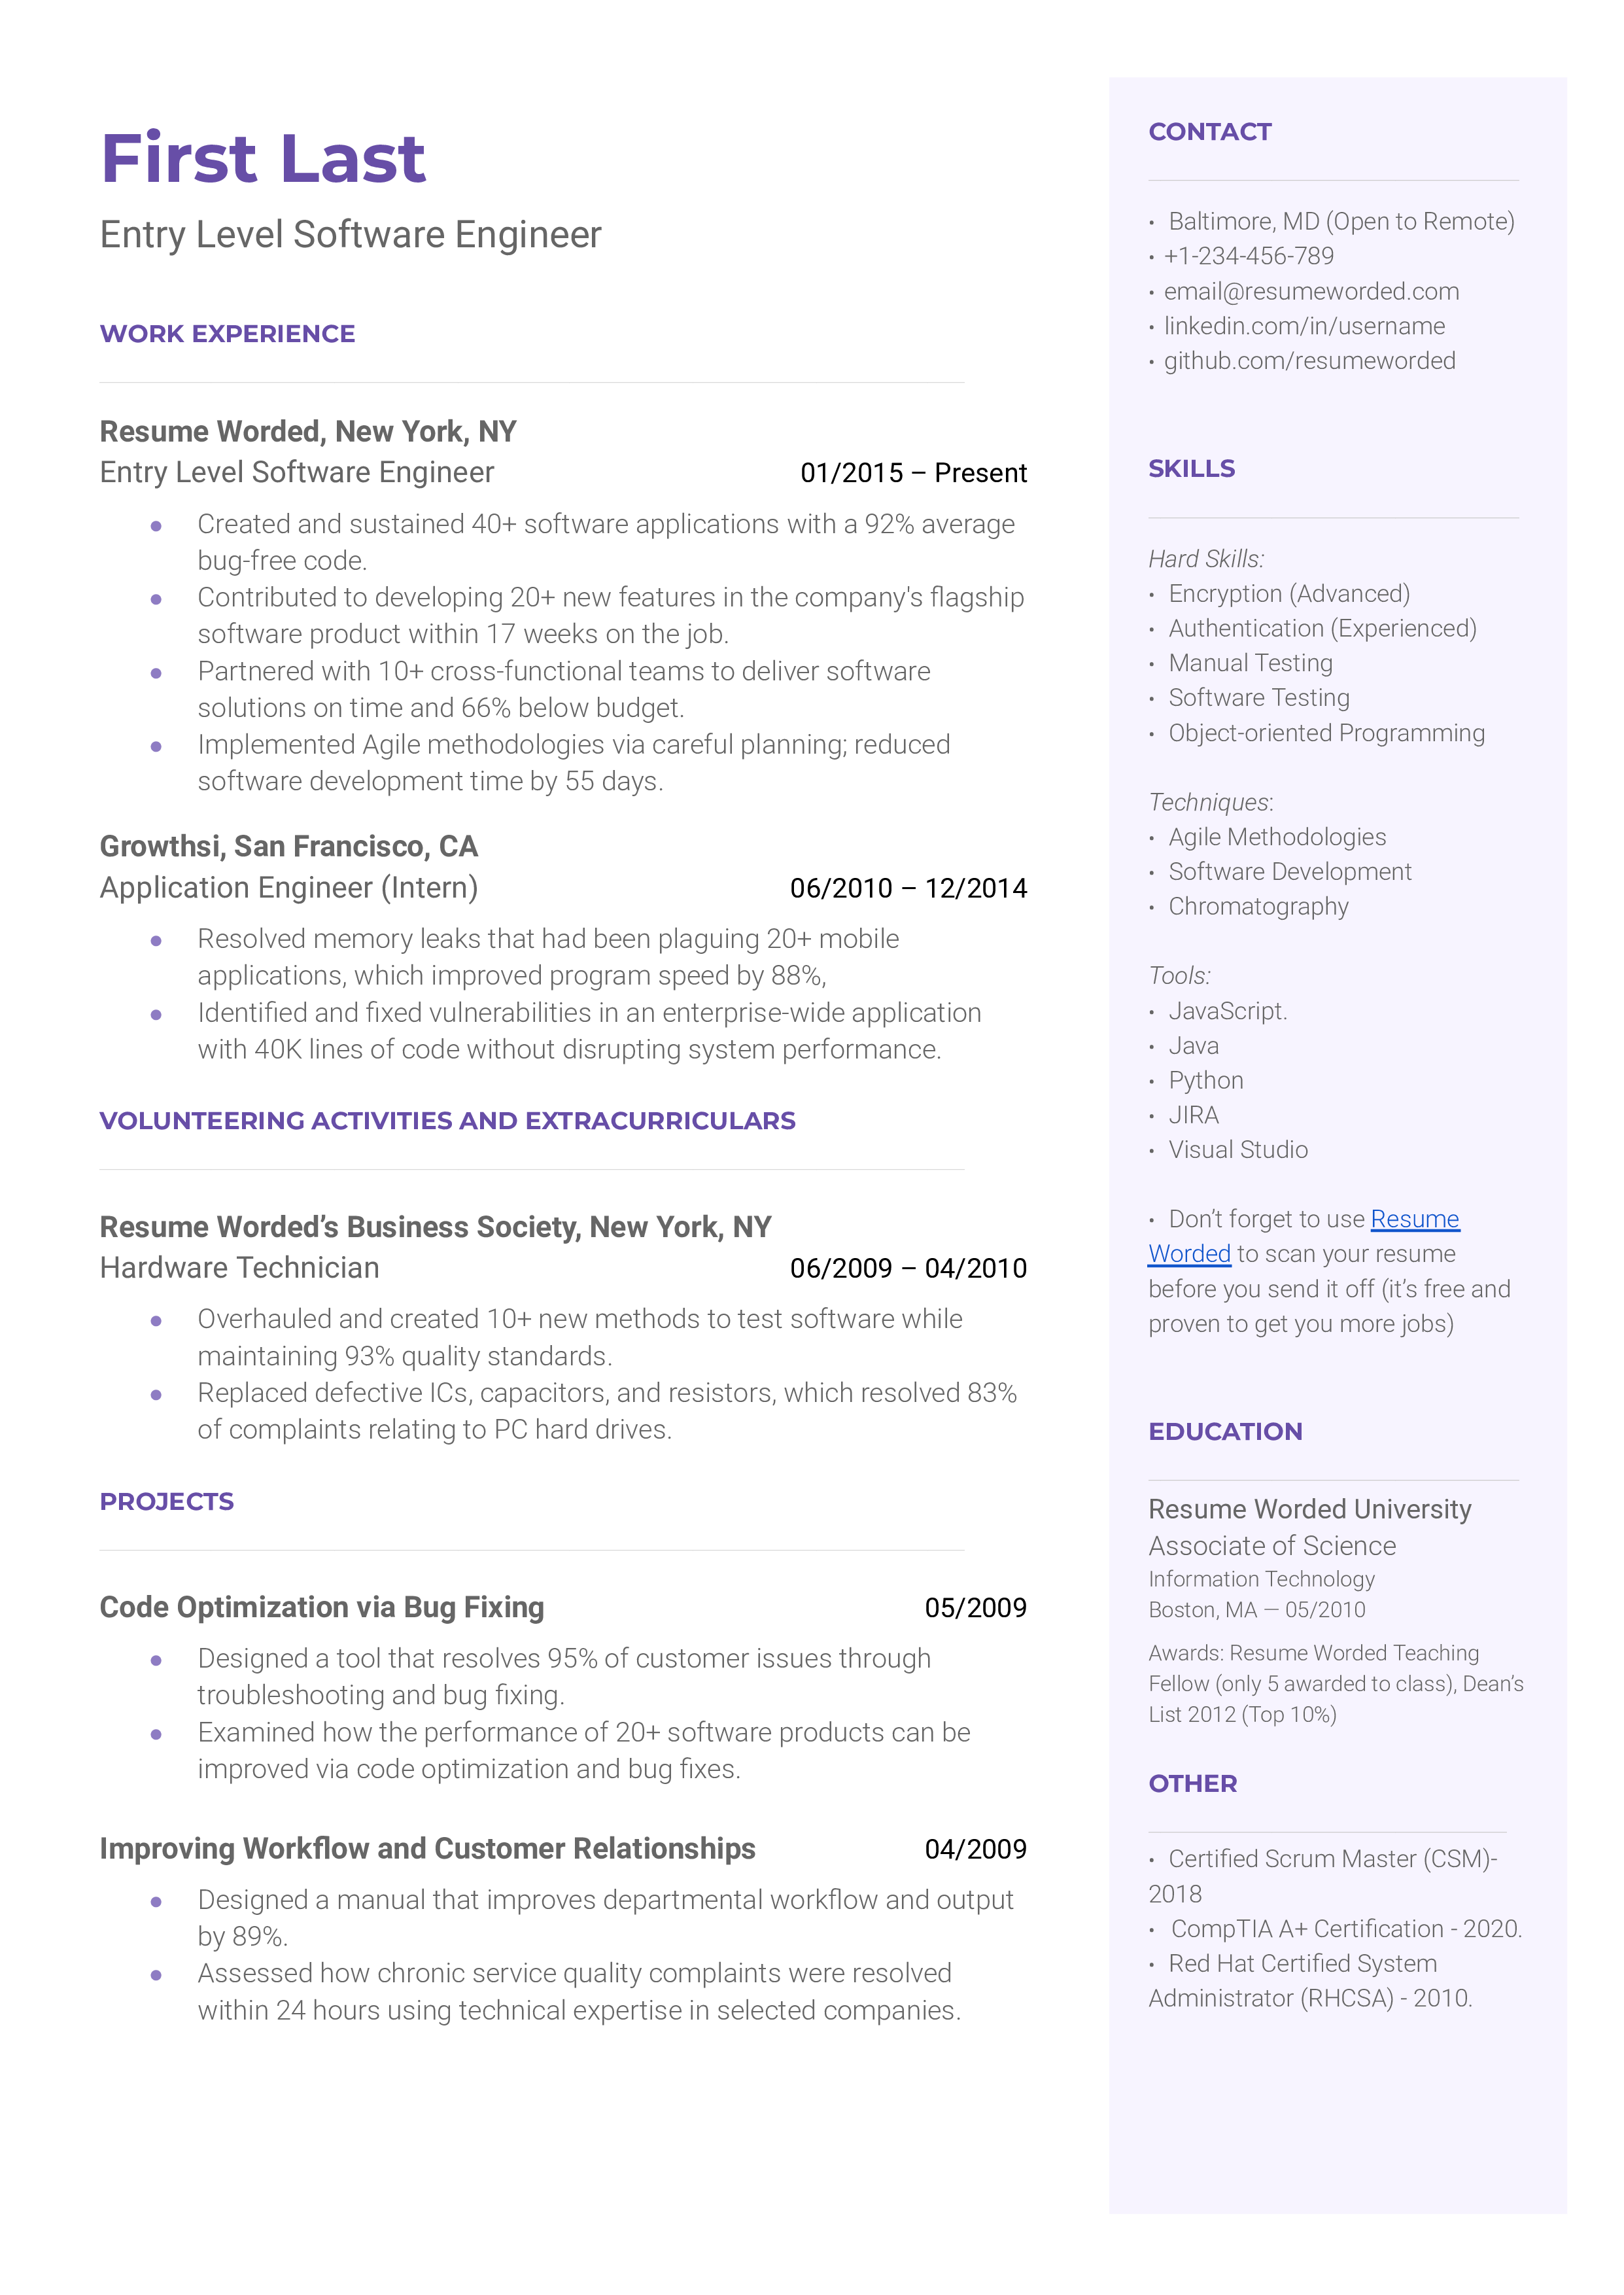 A snapshot of an Entry Level Software Engineer CV showcasing key projects and teamwork experience.